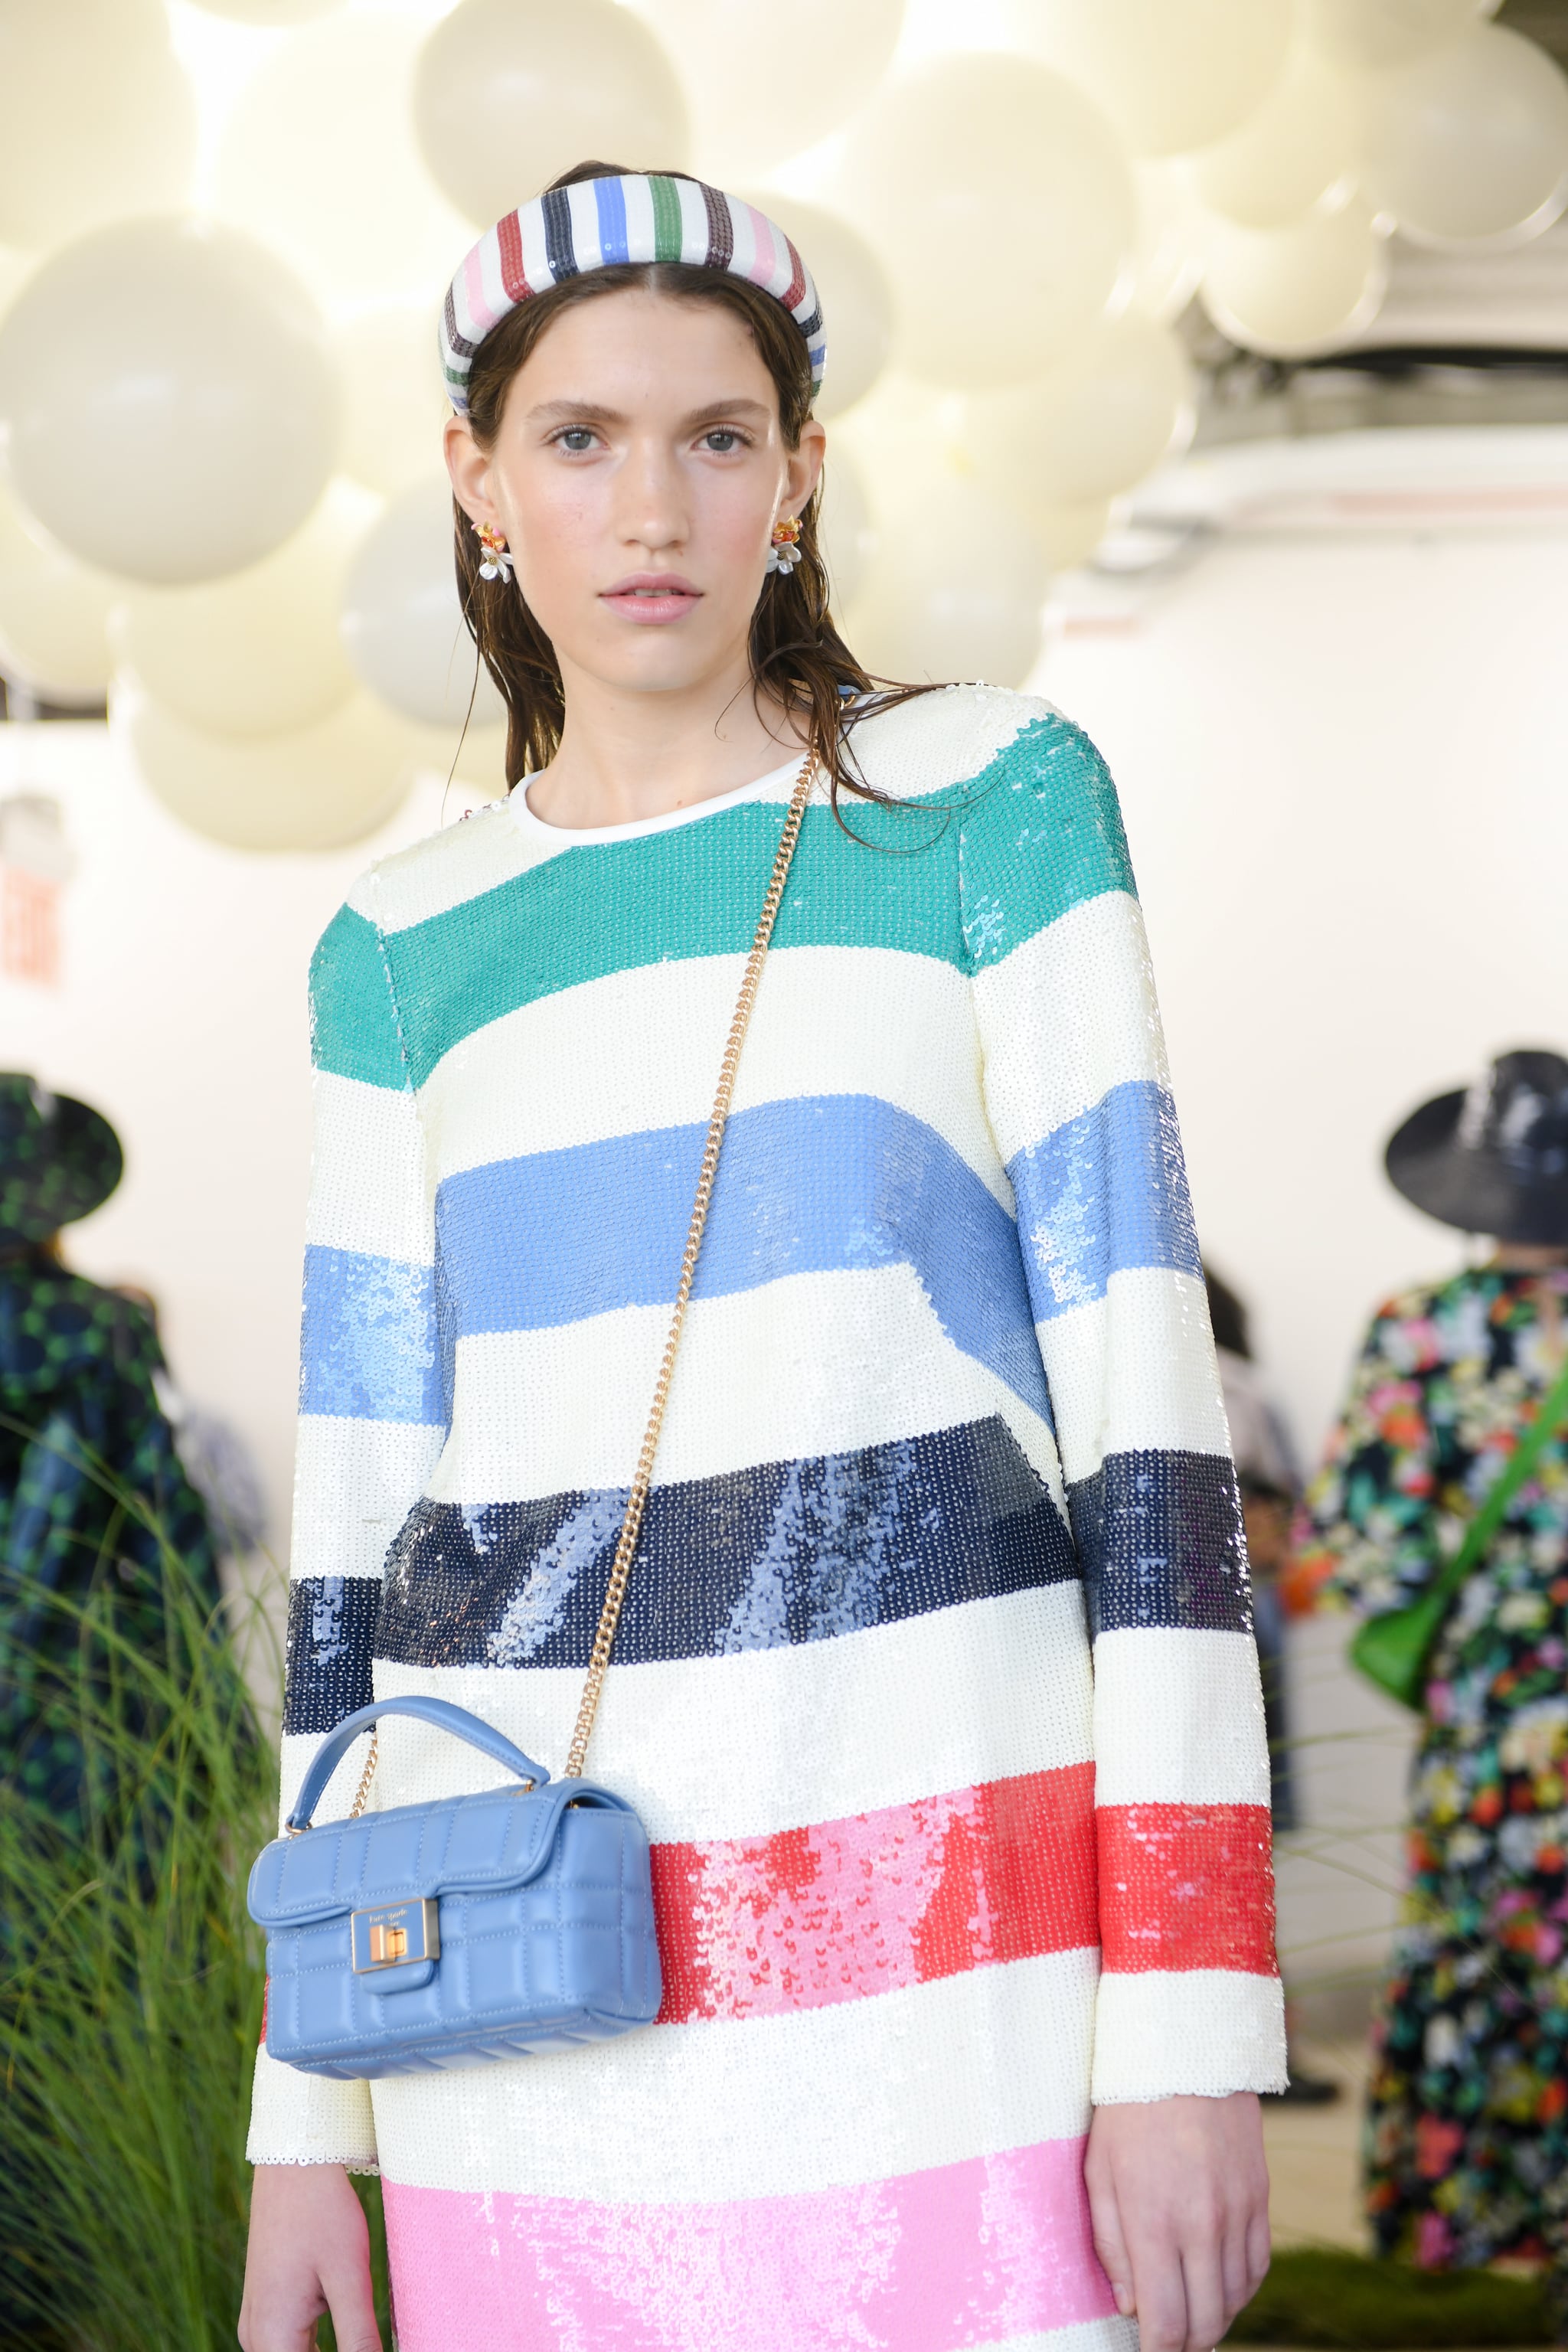 6 Summer 2023 Bag Trends Even Fashion Experts Are Investing In